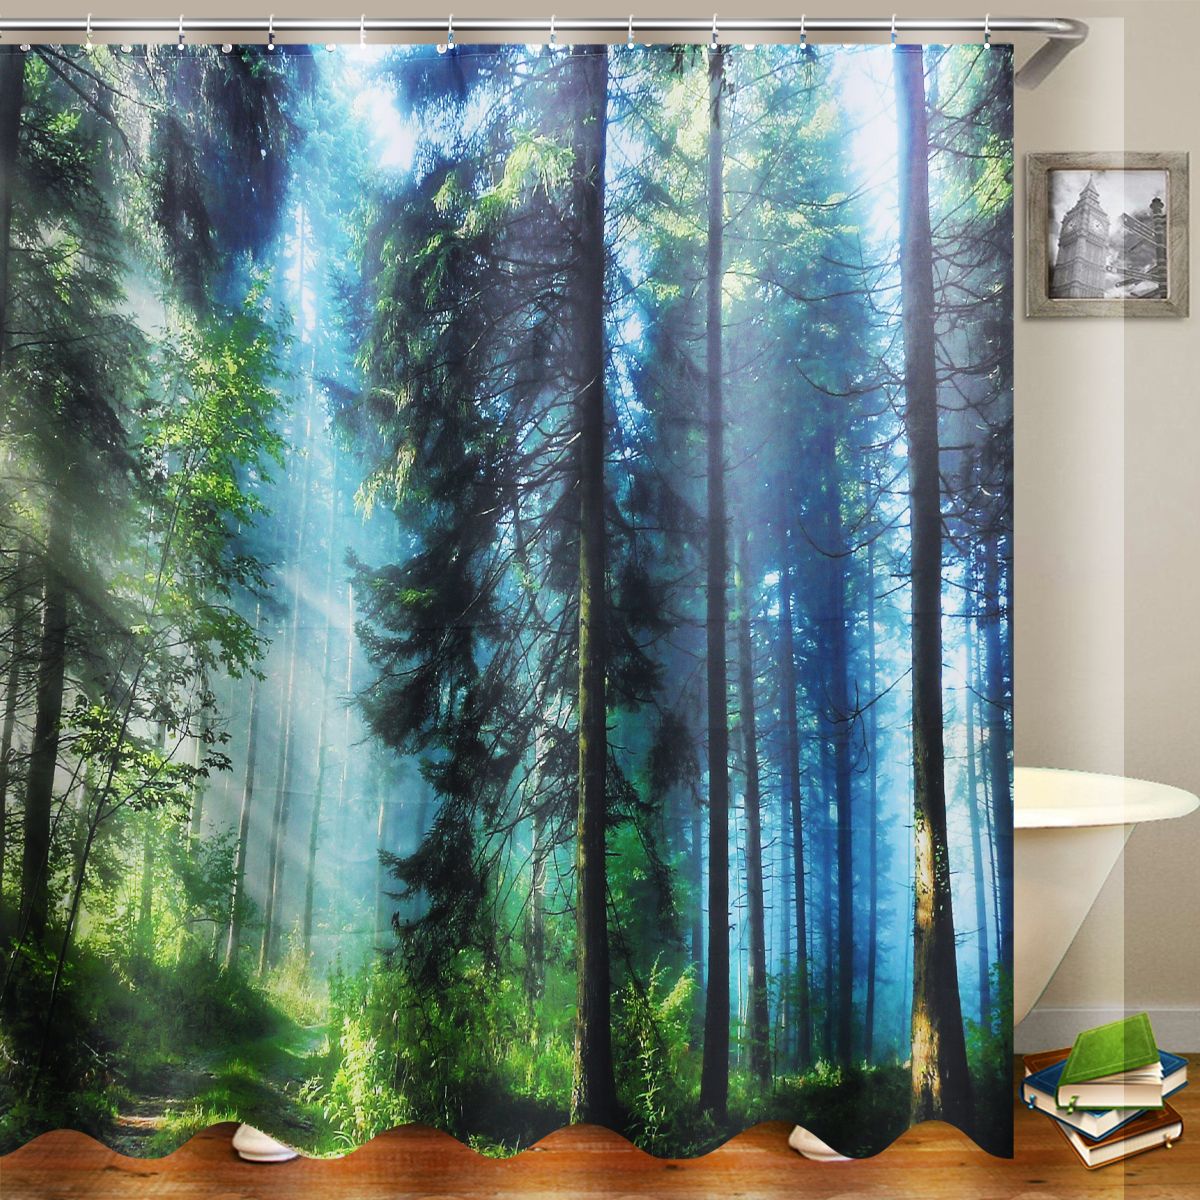 Bath-Curtains-Waterproof-Polyester-Fabric-Washable-Bathroom-Shower-Curtain-Screen-with-Hooks-Accesso-1552630